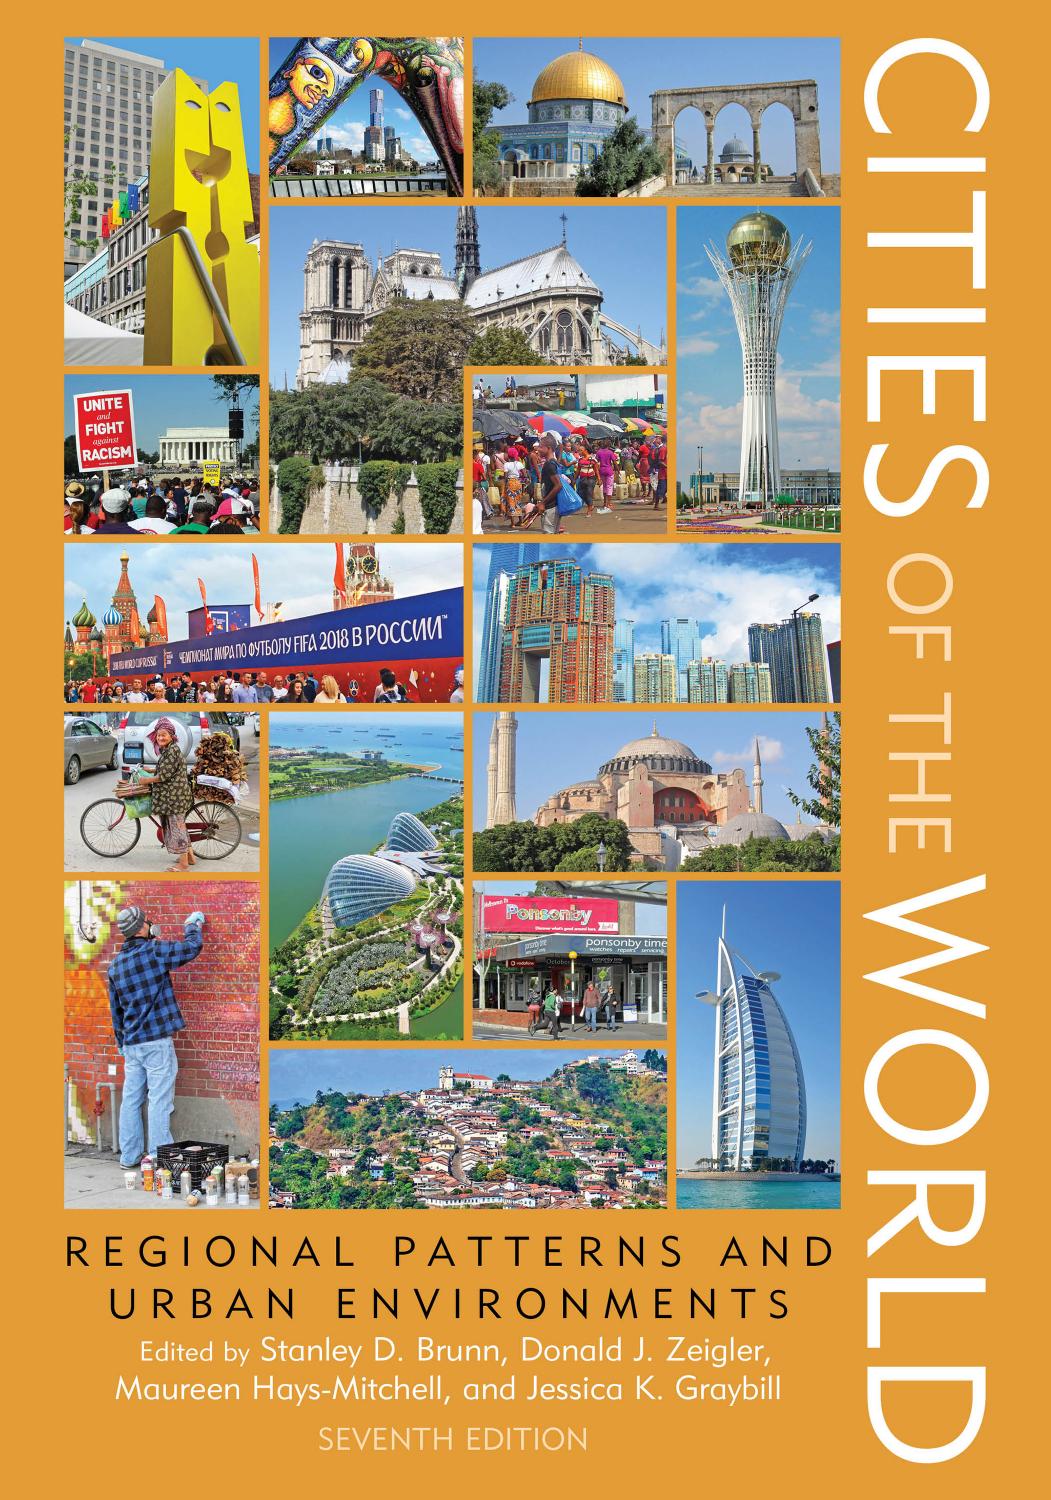 (eBook PDF)Cities of the World: Regional Patterns and Urban Environments 7th Edition by Stanley Brunn, Donald Zeigler